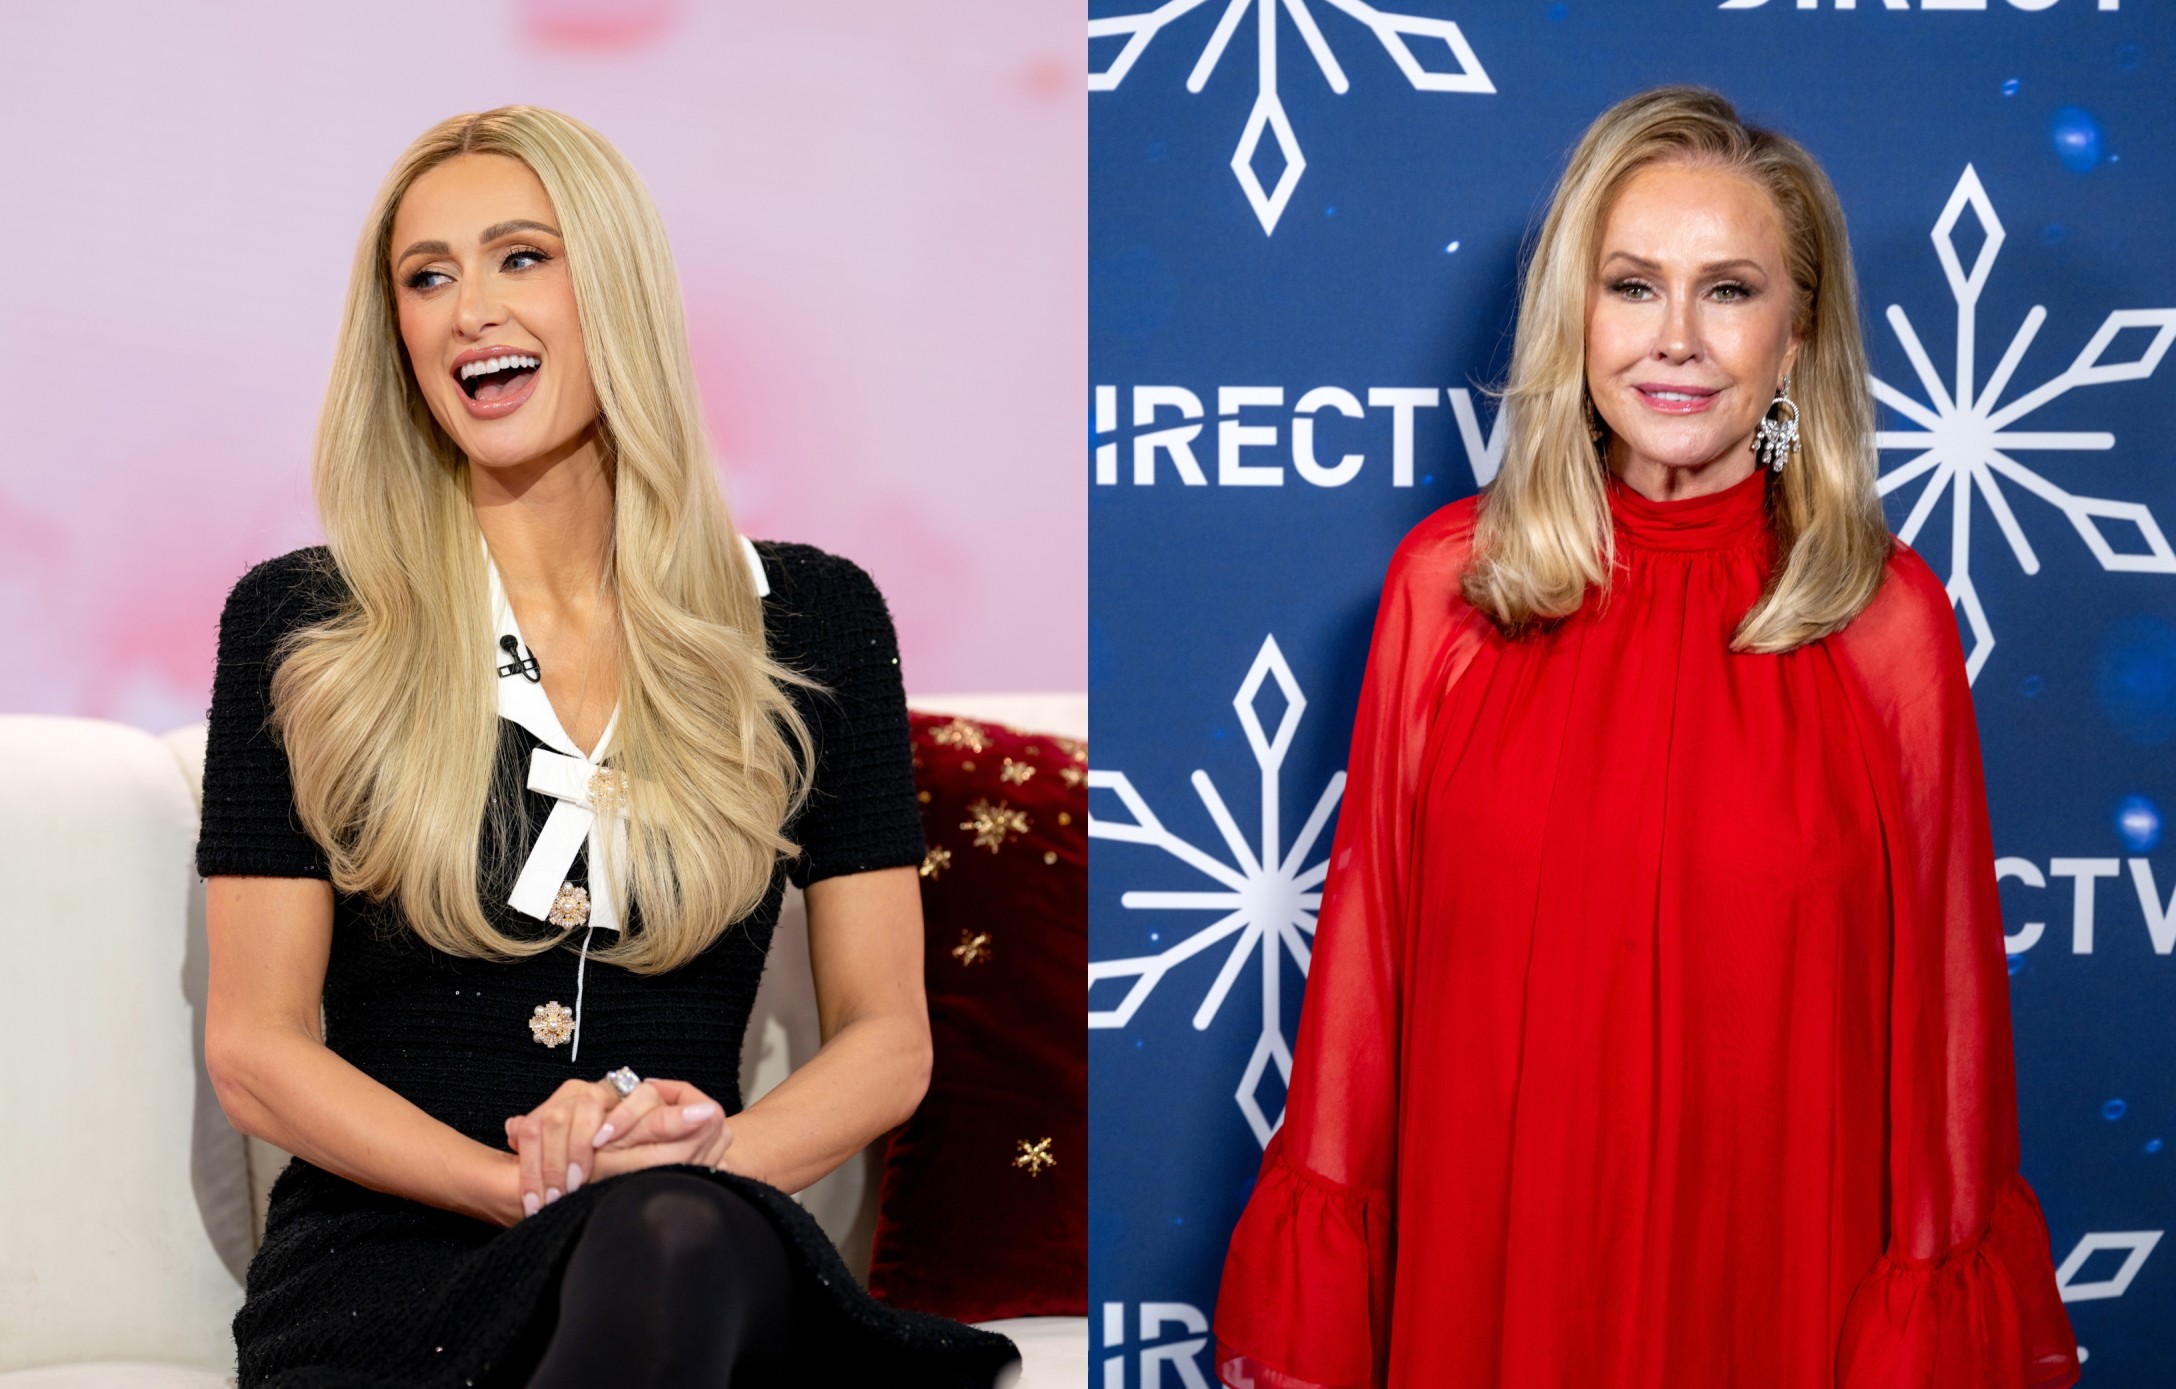 Paris Hilton and mom Kathy are called out over HEAVILY edited